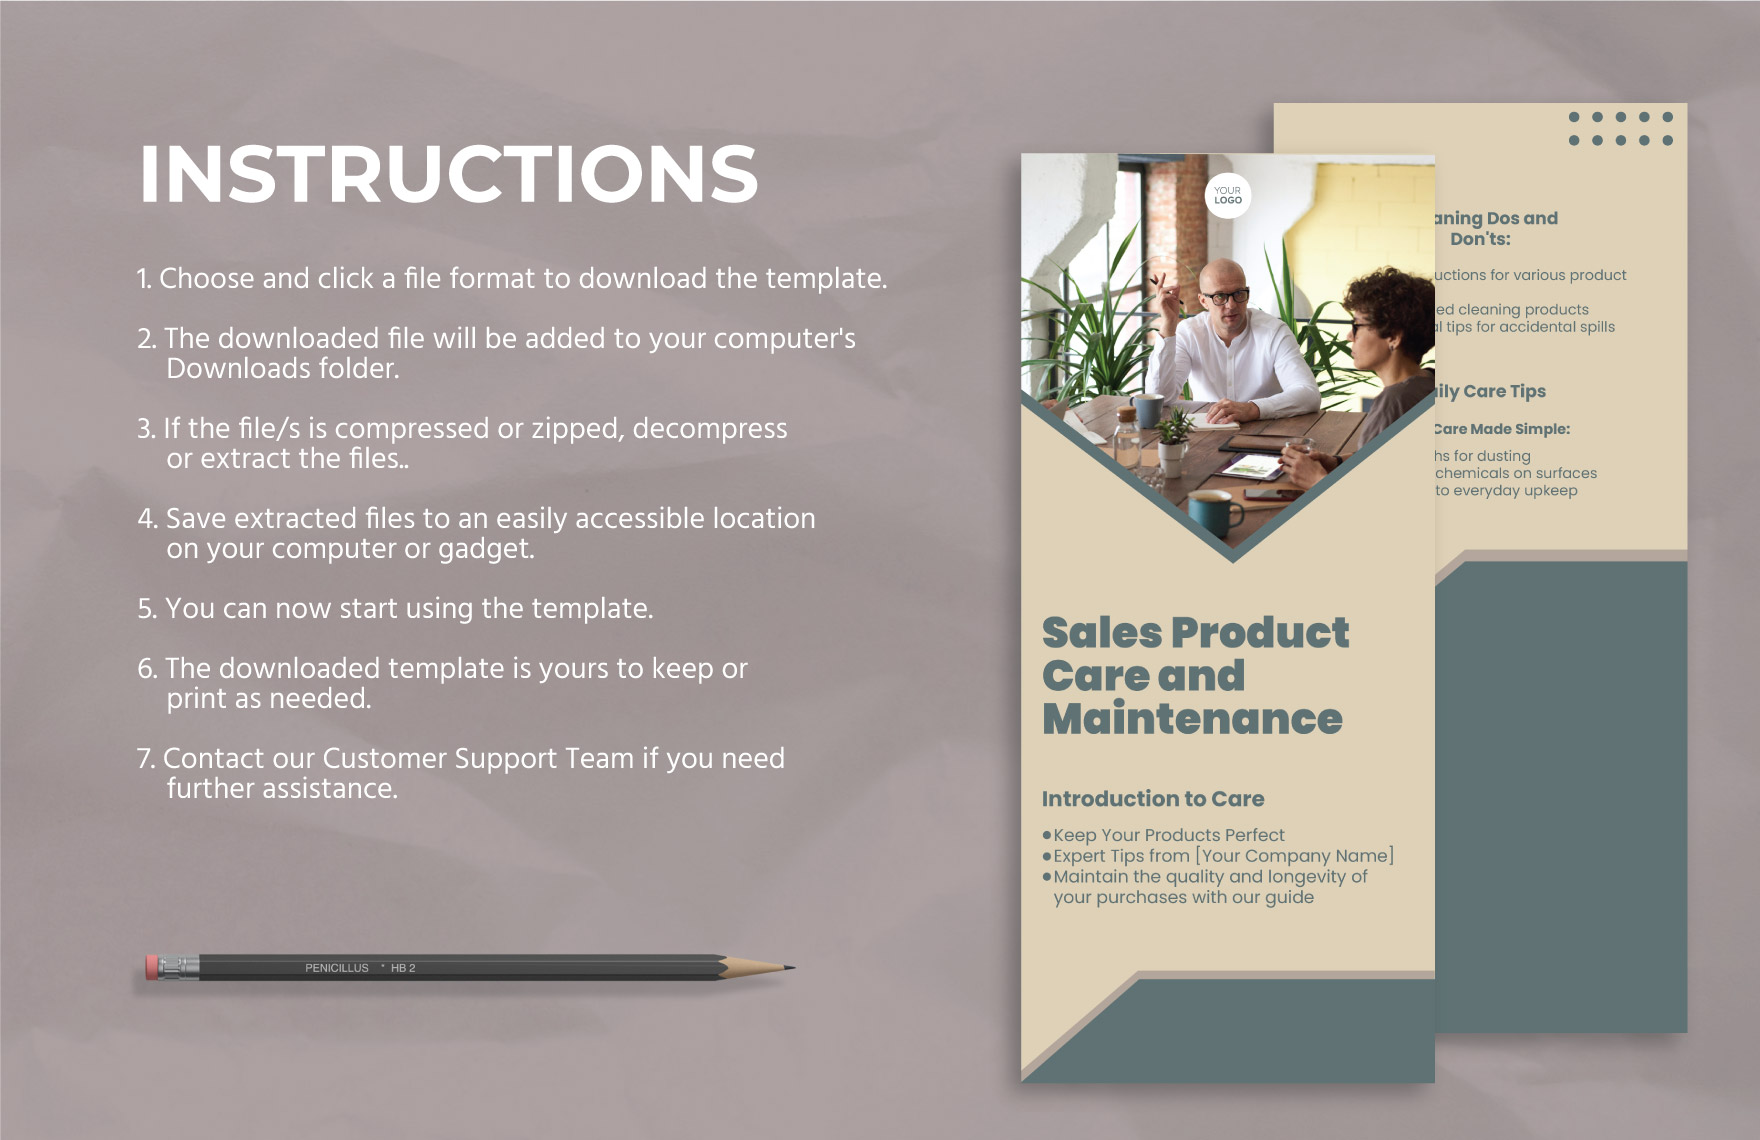 Sales Product Care and Maintenance Rack Card Template